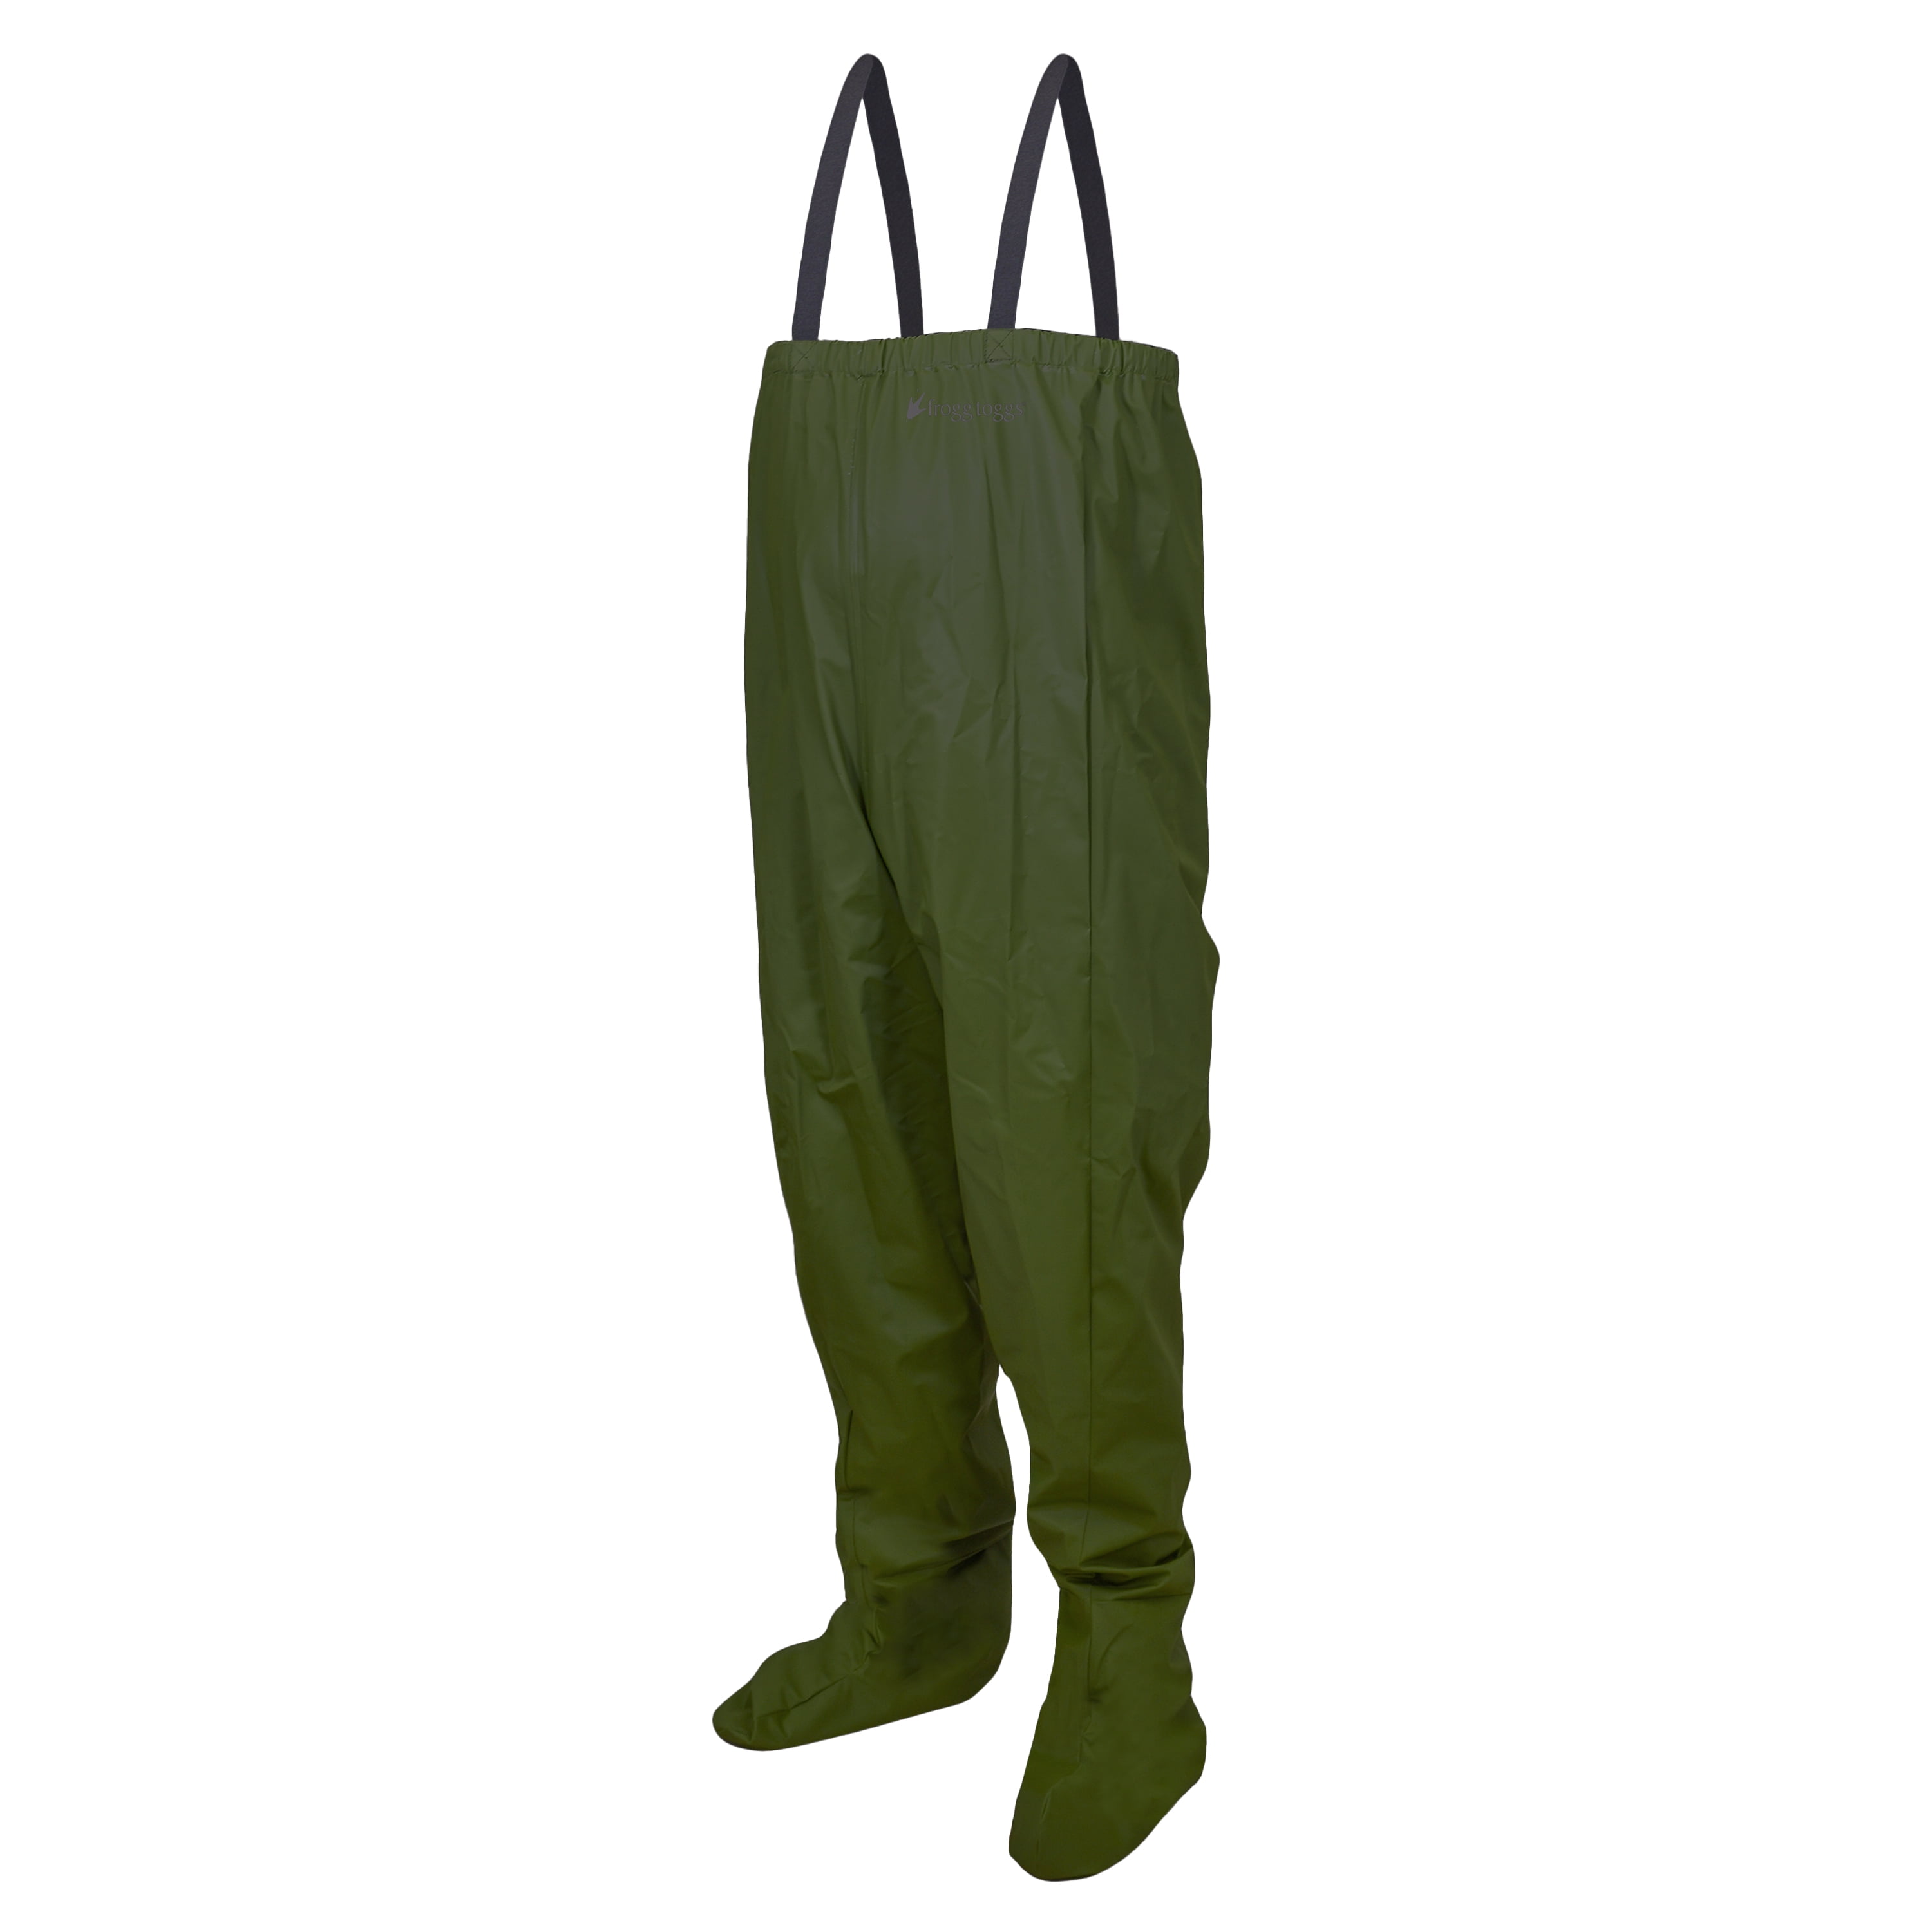 Frogg Toggs Rana Emergency Wader, Forest Green, M/L